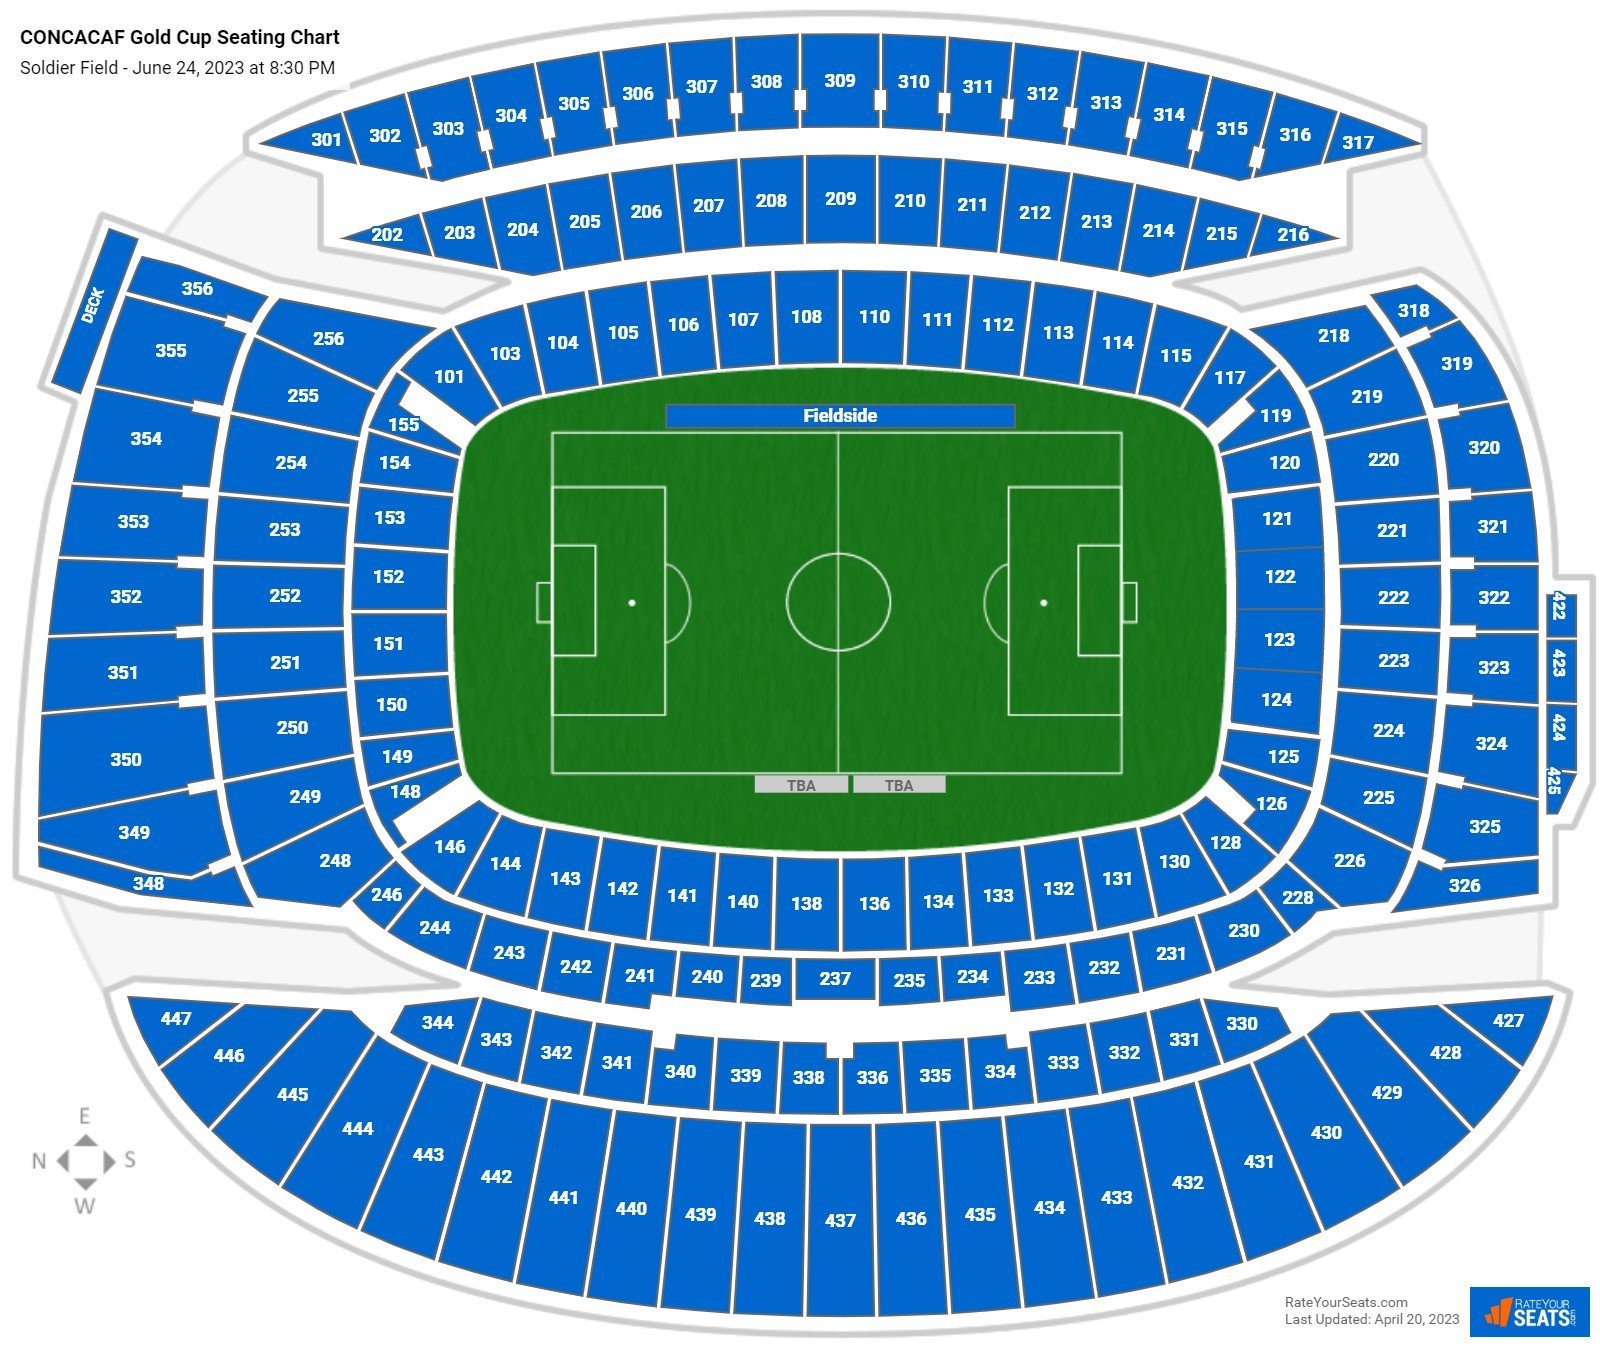 Soldier Field Concert Seating Chart